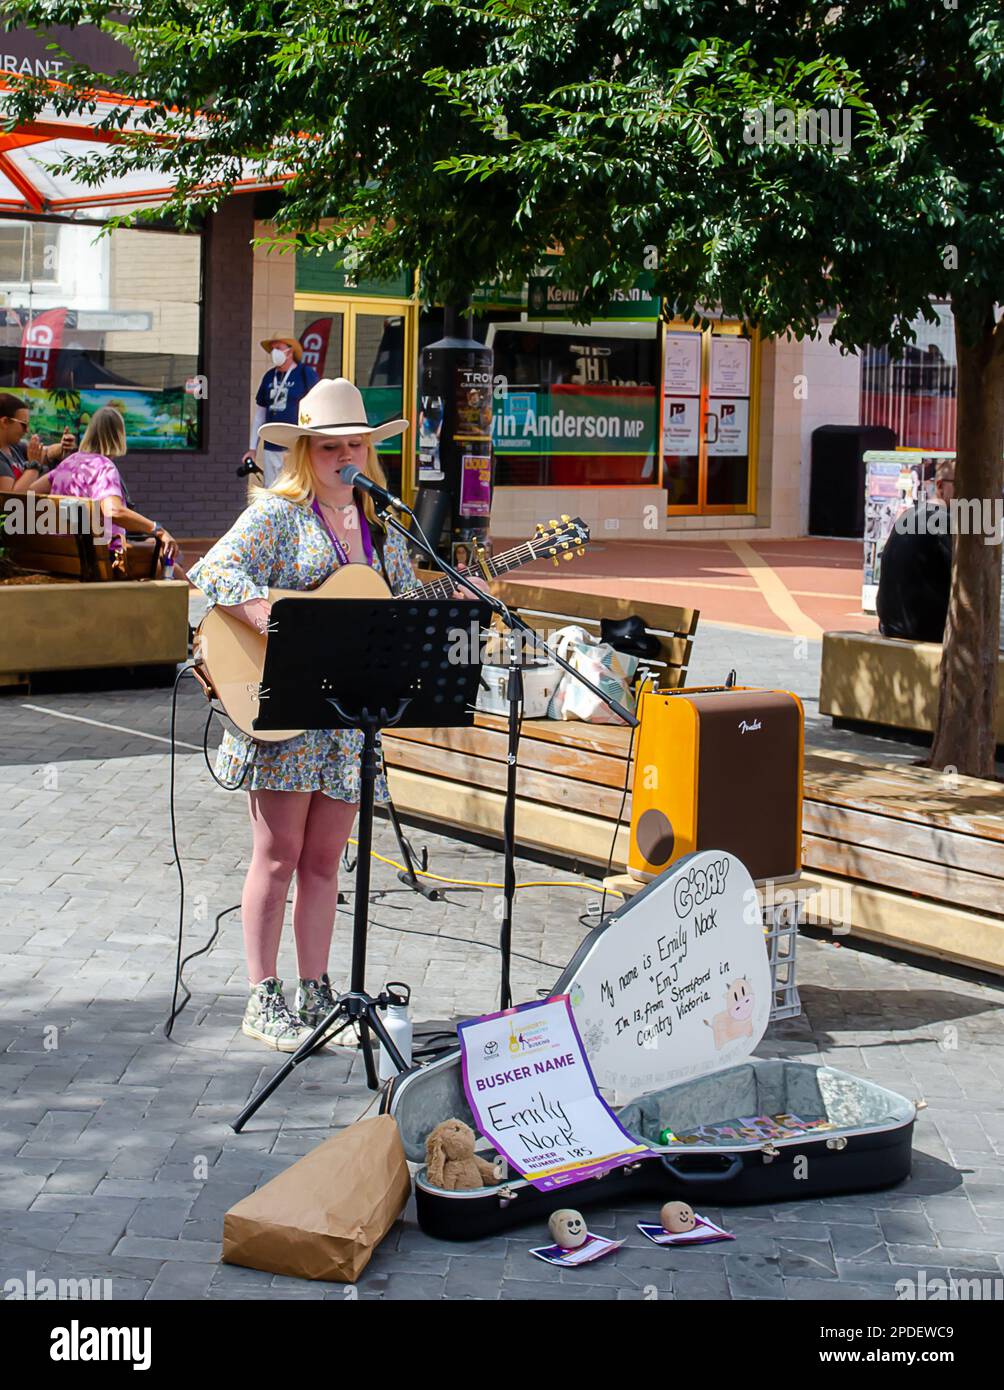 13 year old Emily, singer and guitarist, buskiking at Tamworth Country Musuc Festival. Stock Photo